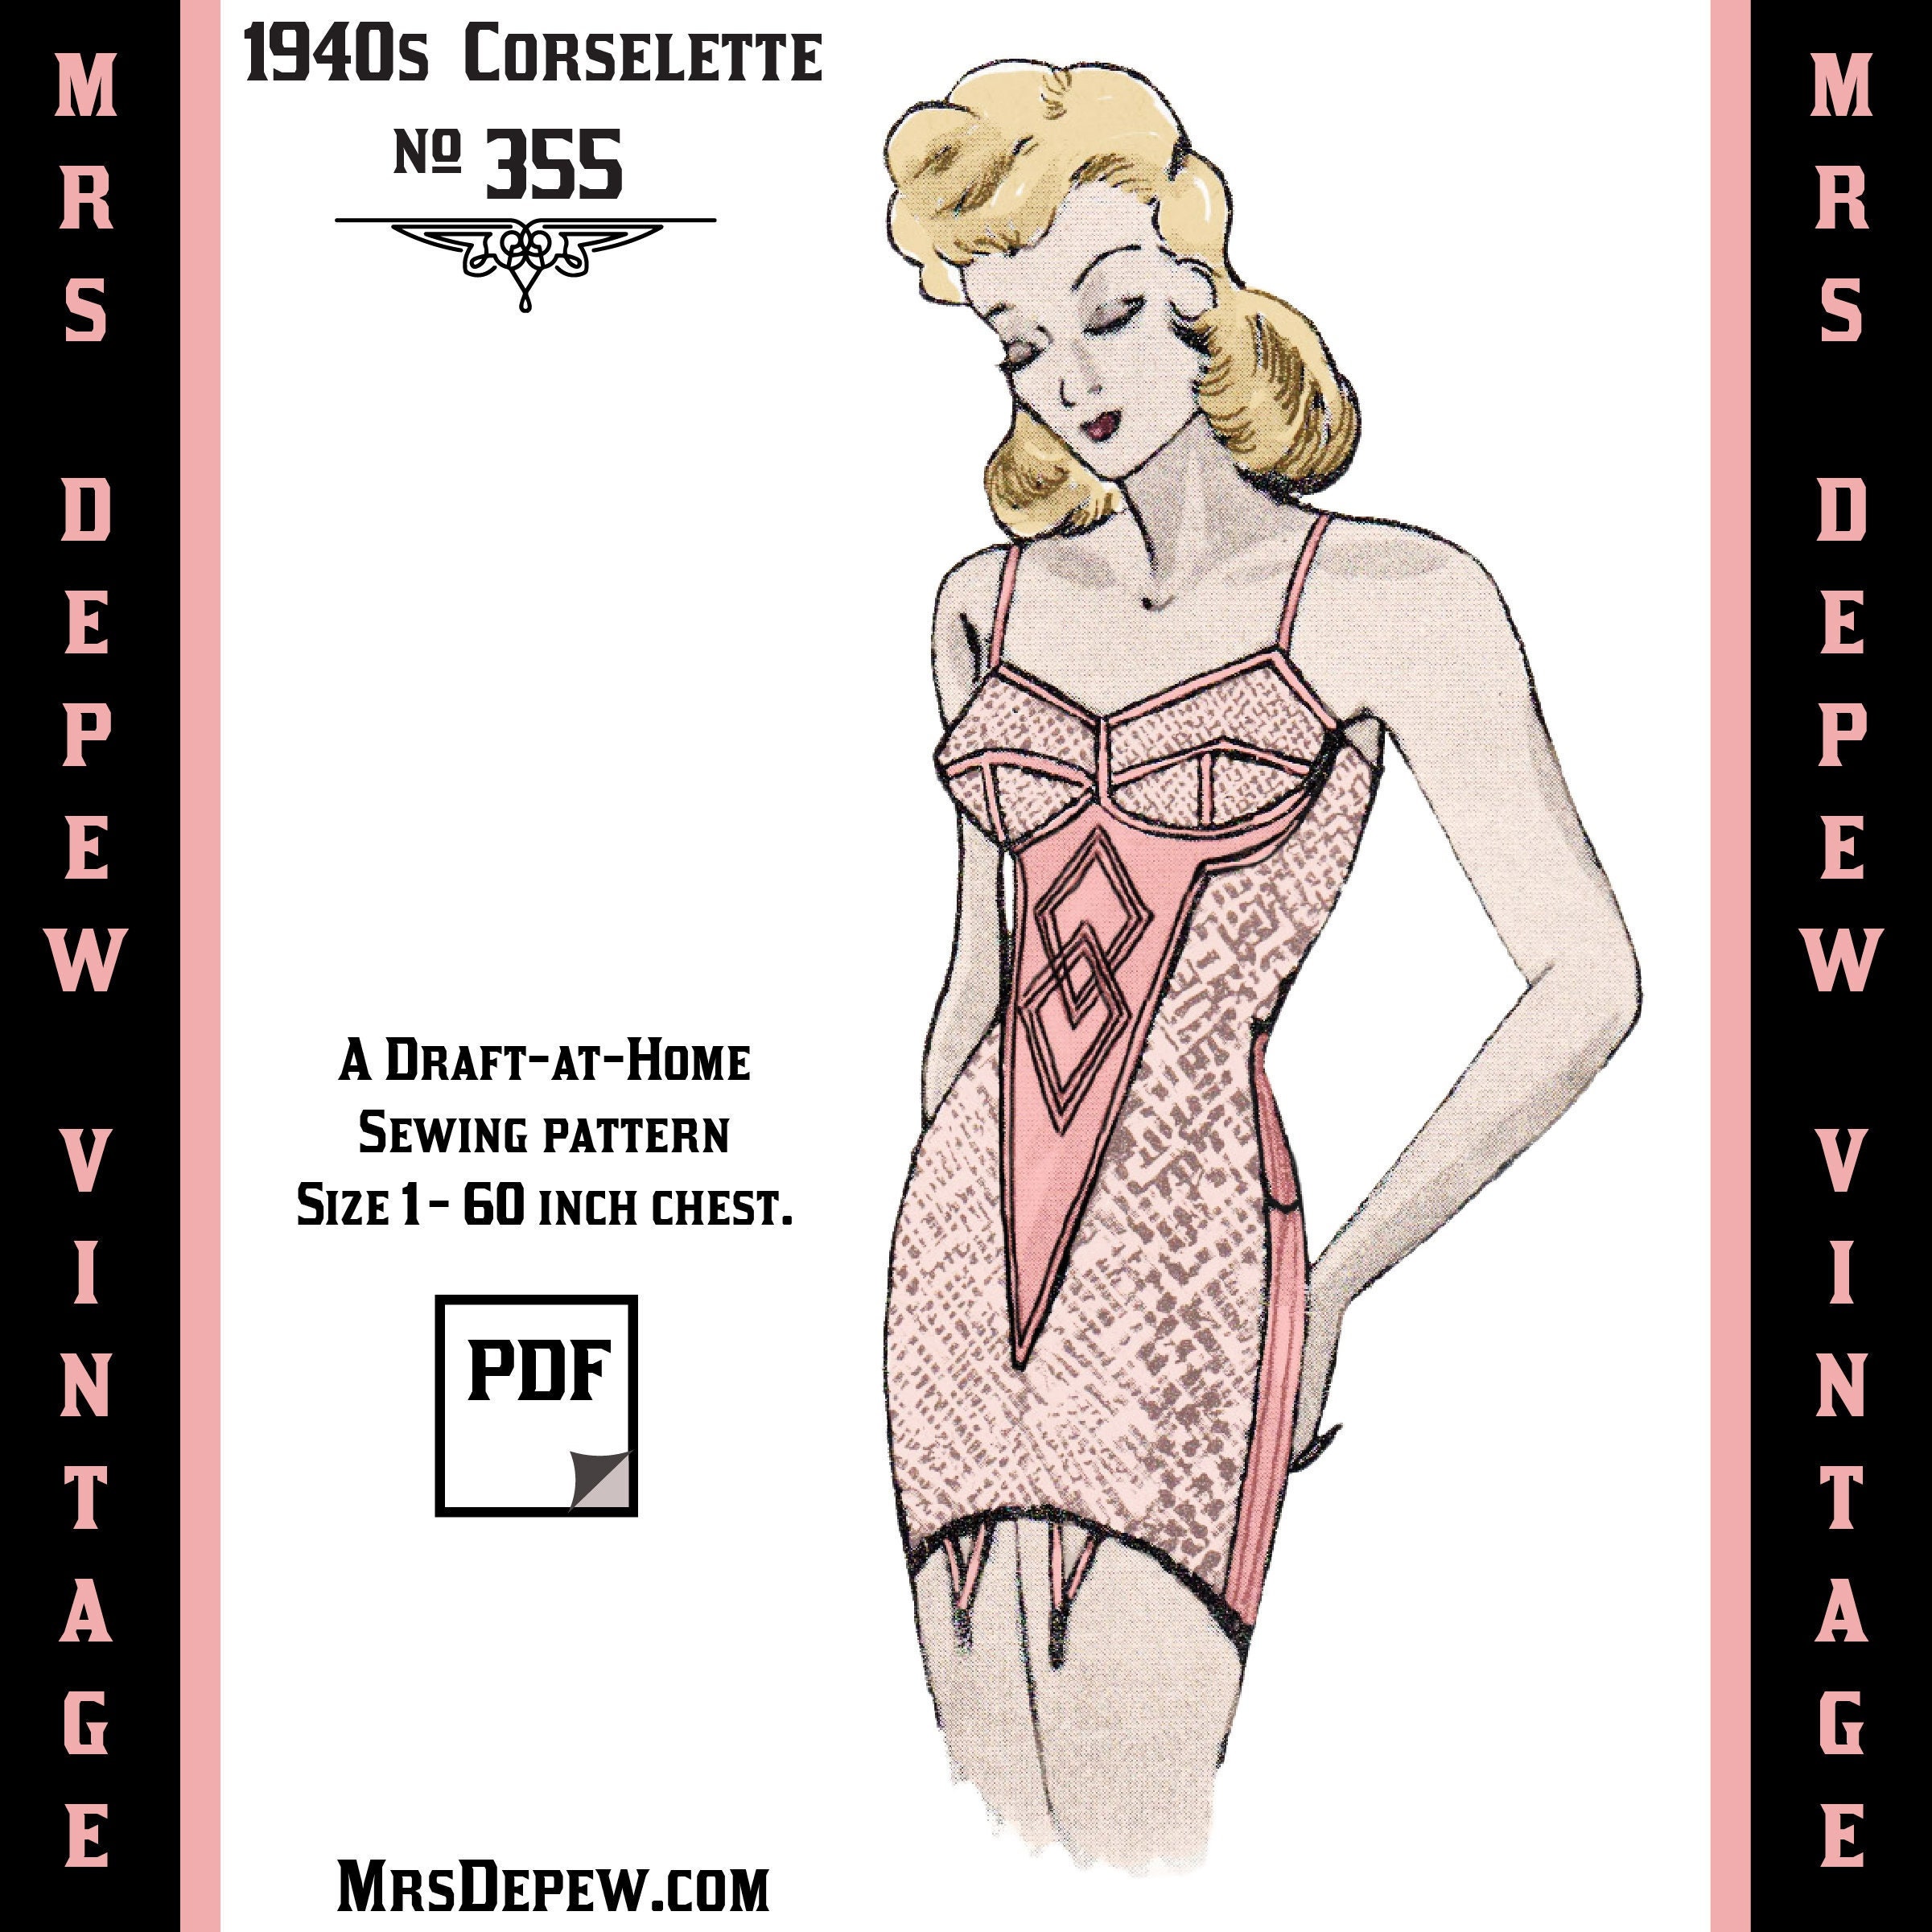 Vintage Sewing Pattern Template & Scale Rulers 1940s Corselette